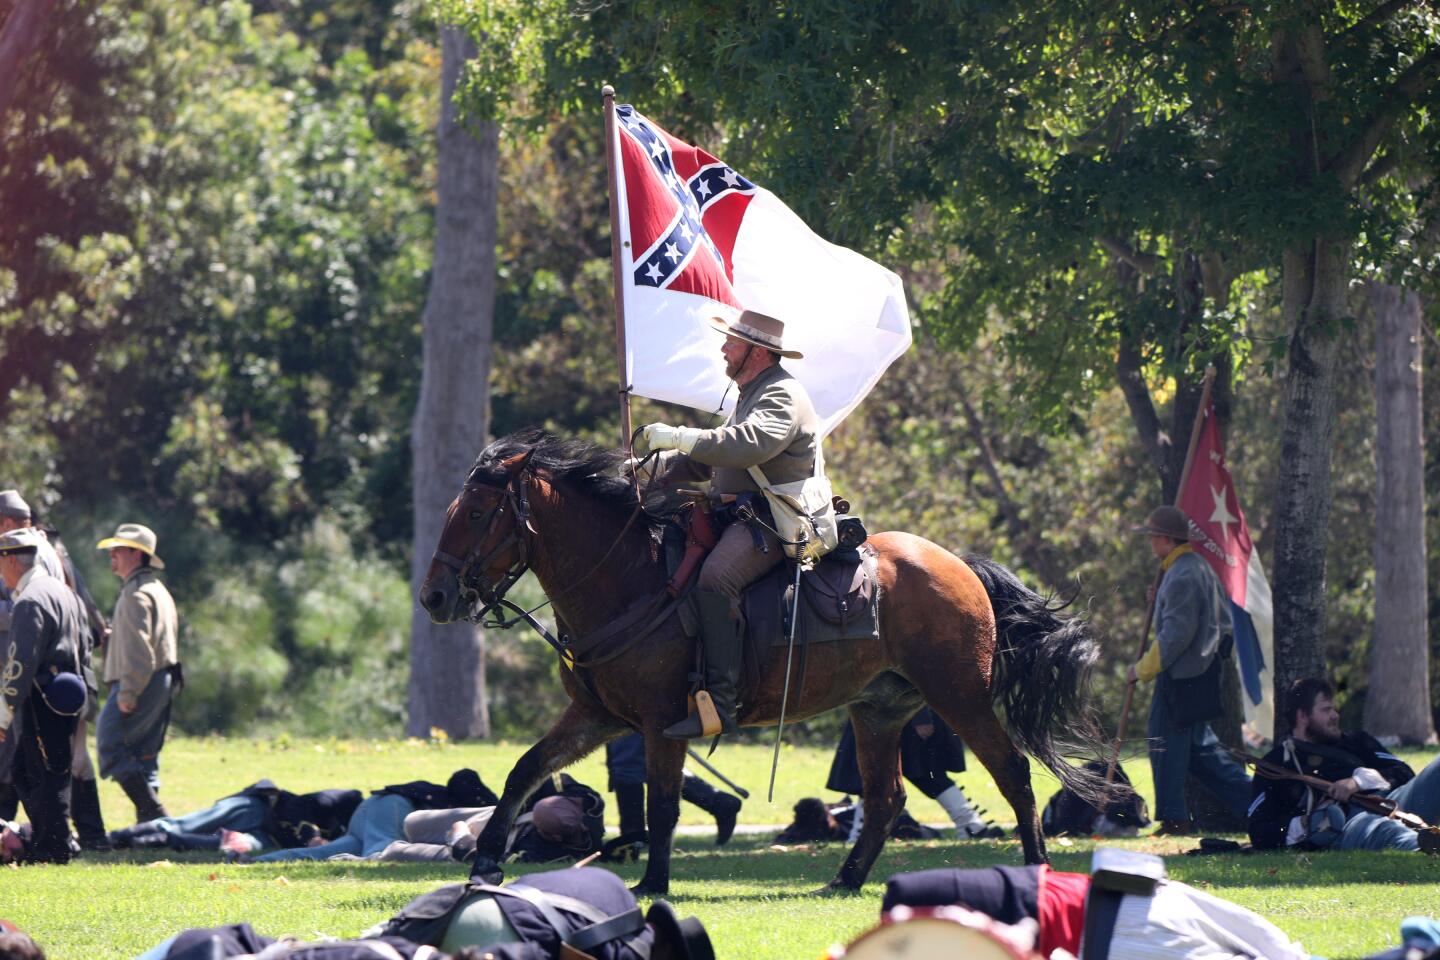 A rebel rider carries their flag into battle at the Huntington Beach Historical Society's Civil War Reenactment at Central Park, in Huntington Beach on Saturday, Aug. 31, 2019. It's the 26th annual Civil War Days Living History Event at the park.